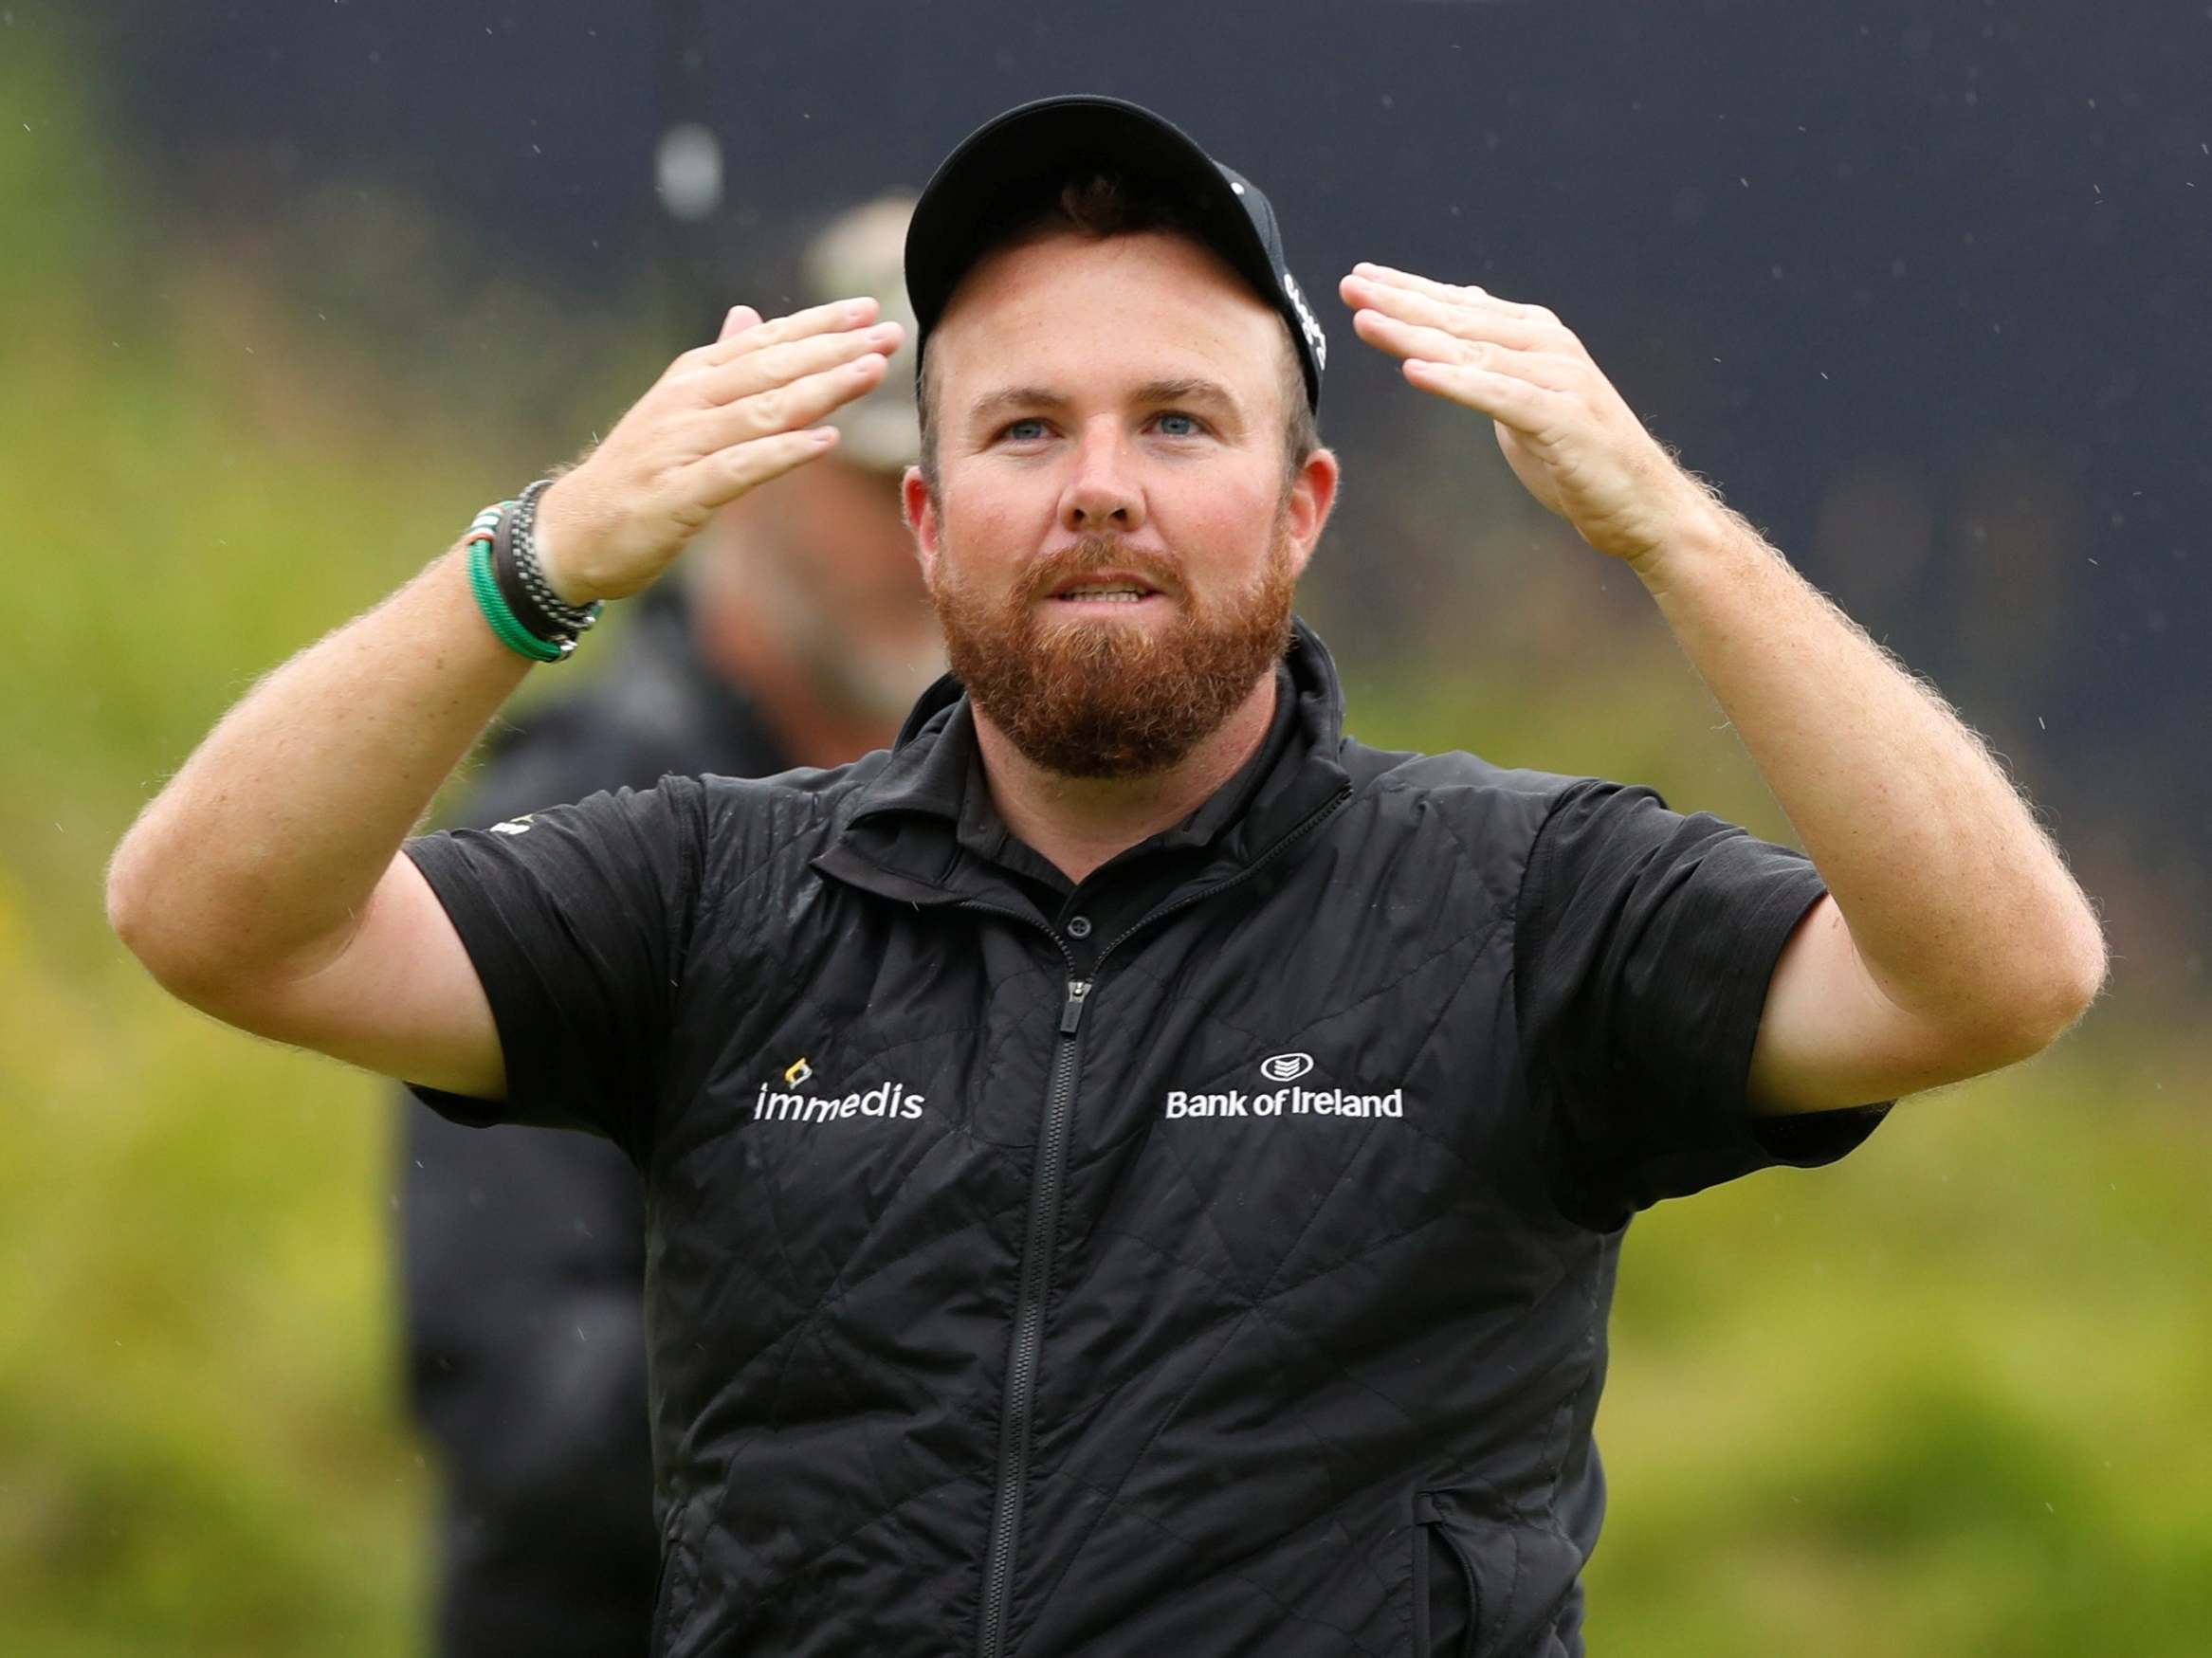 Shane Lowry soaks up the celebrations on the 18th after winning The Open